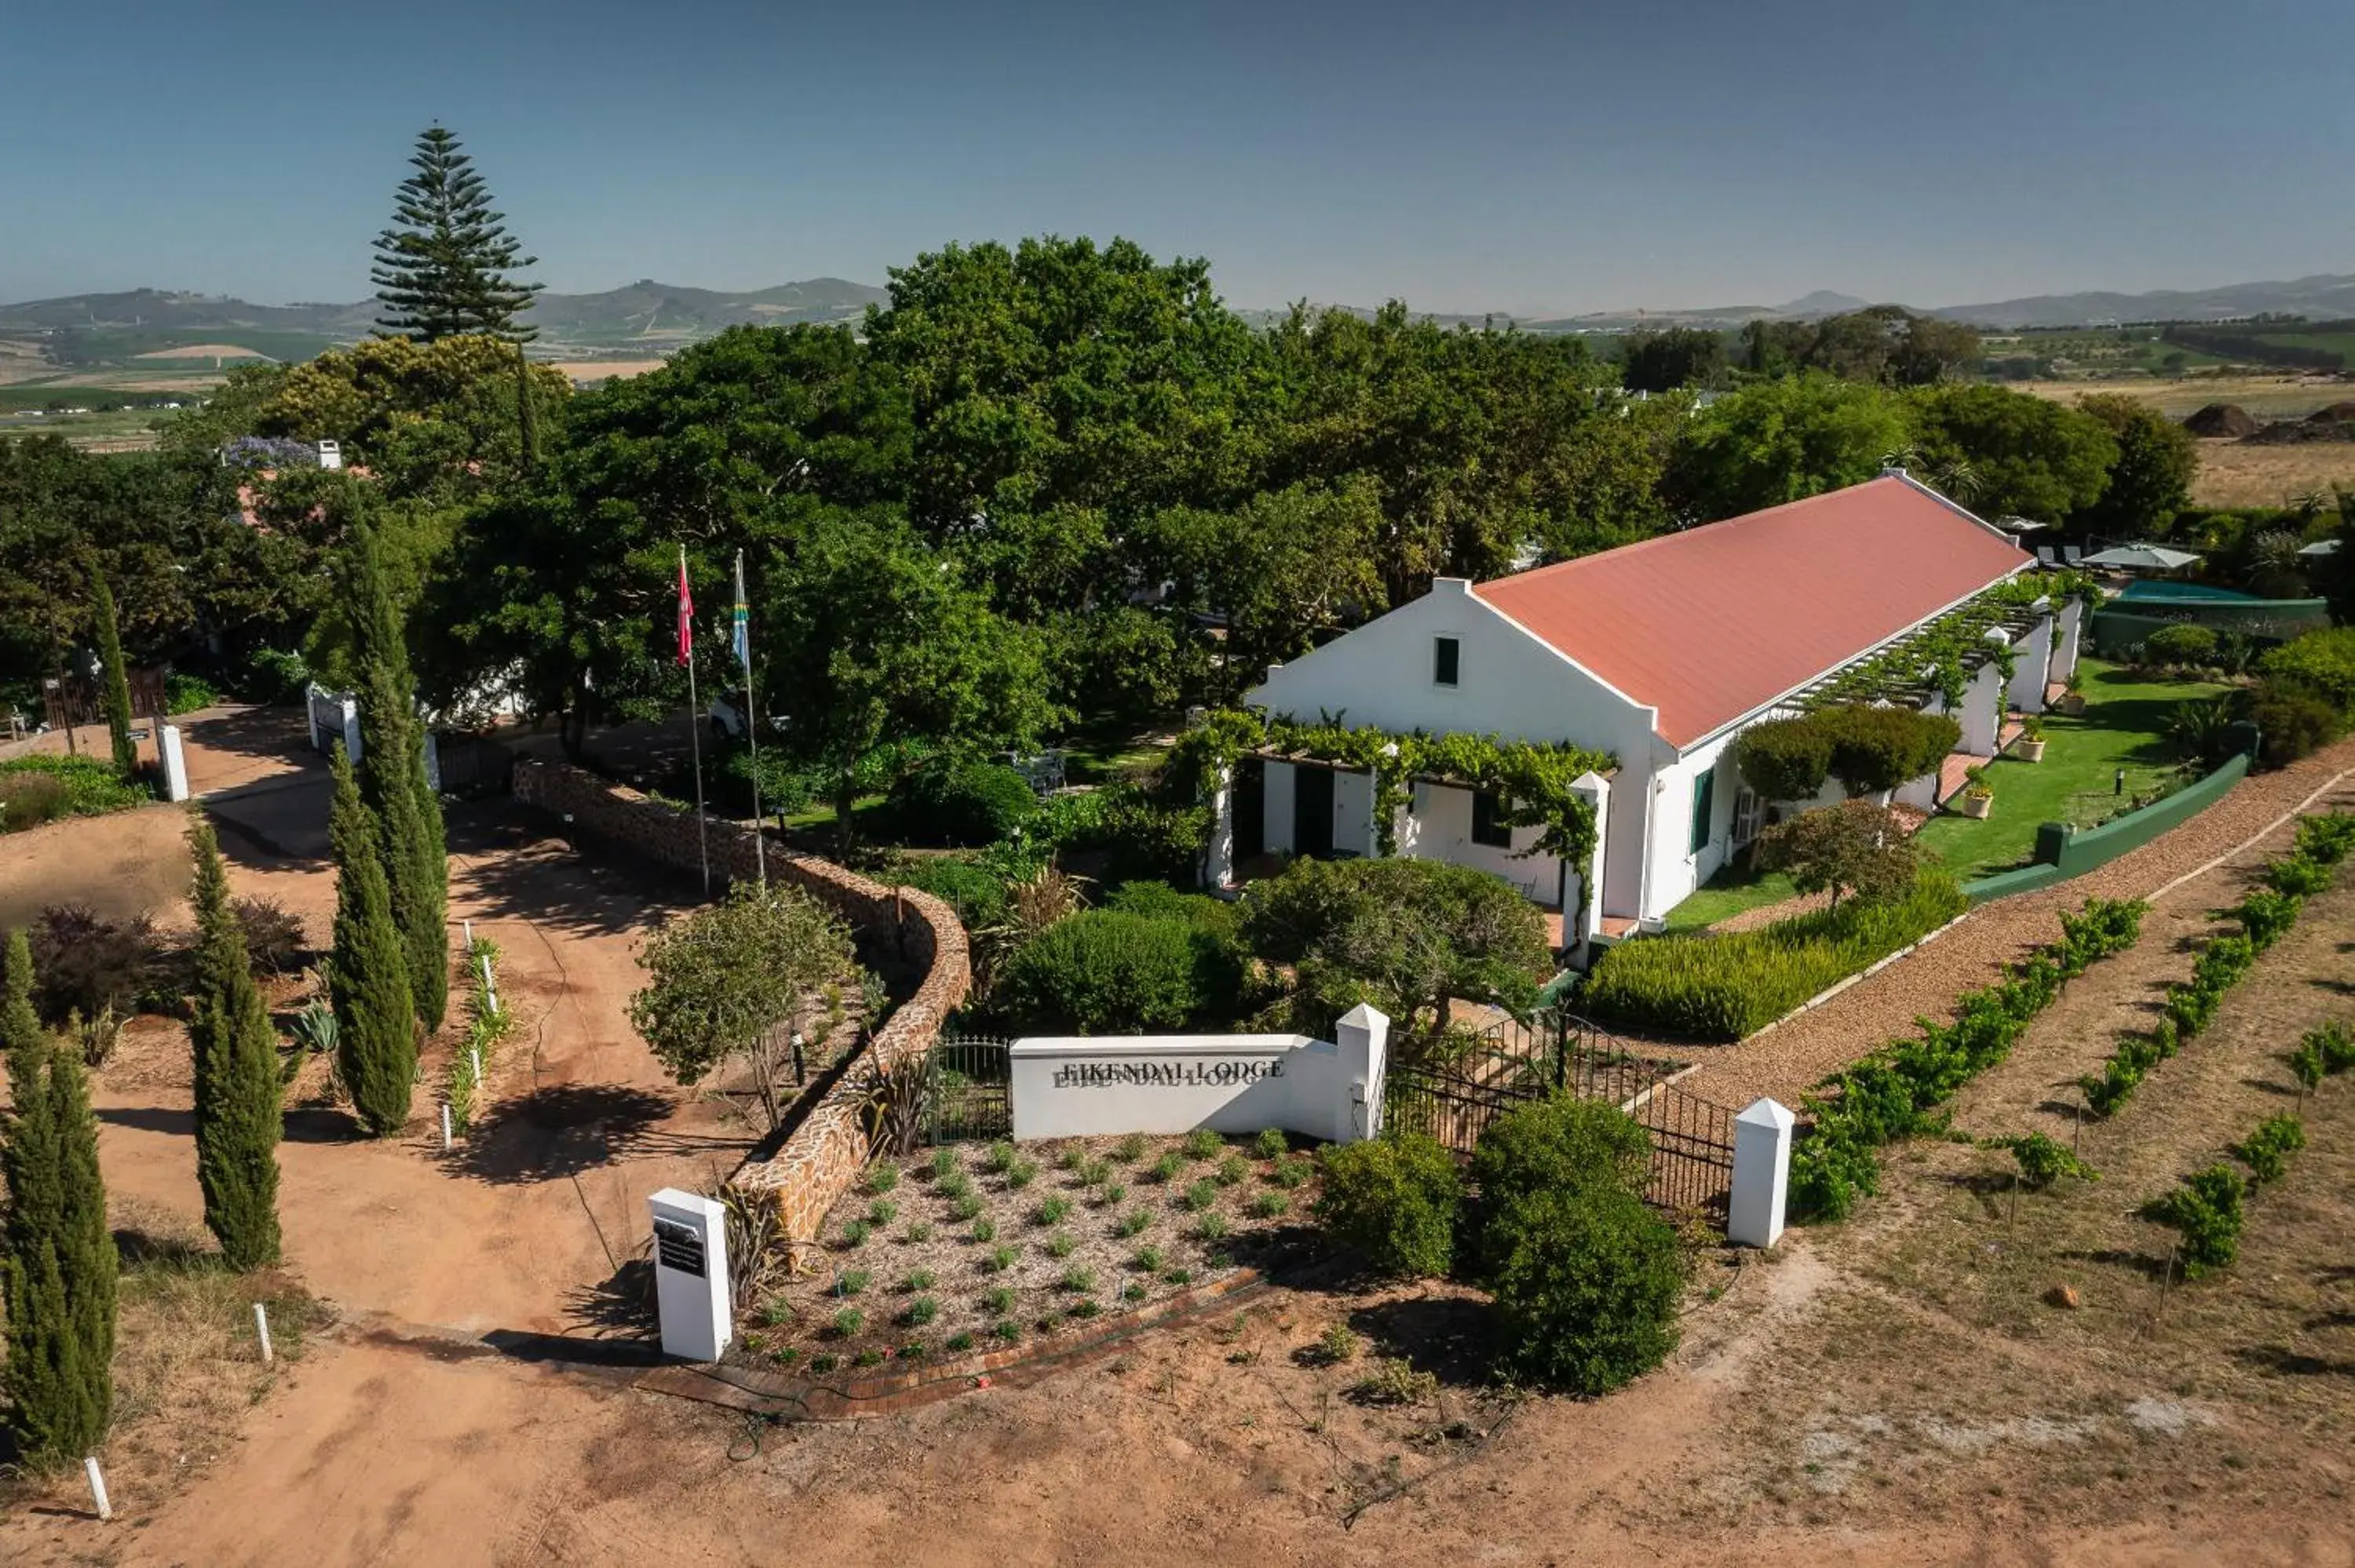 Property building, Bird's-eye View in Eikendal Lodge